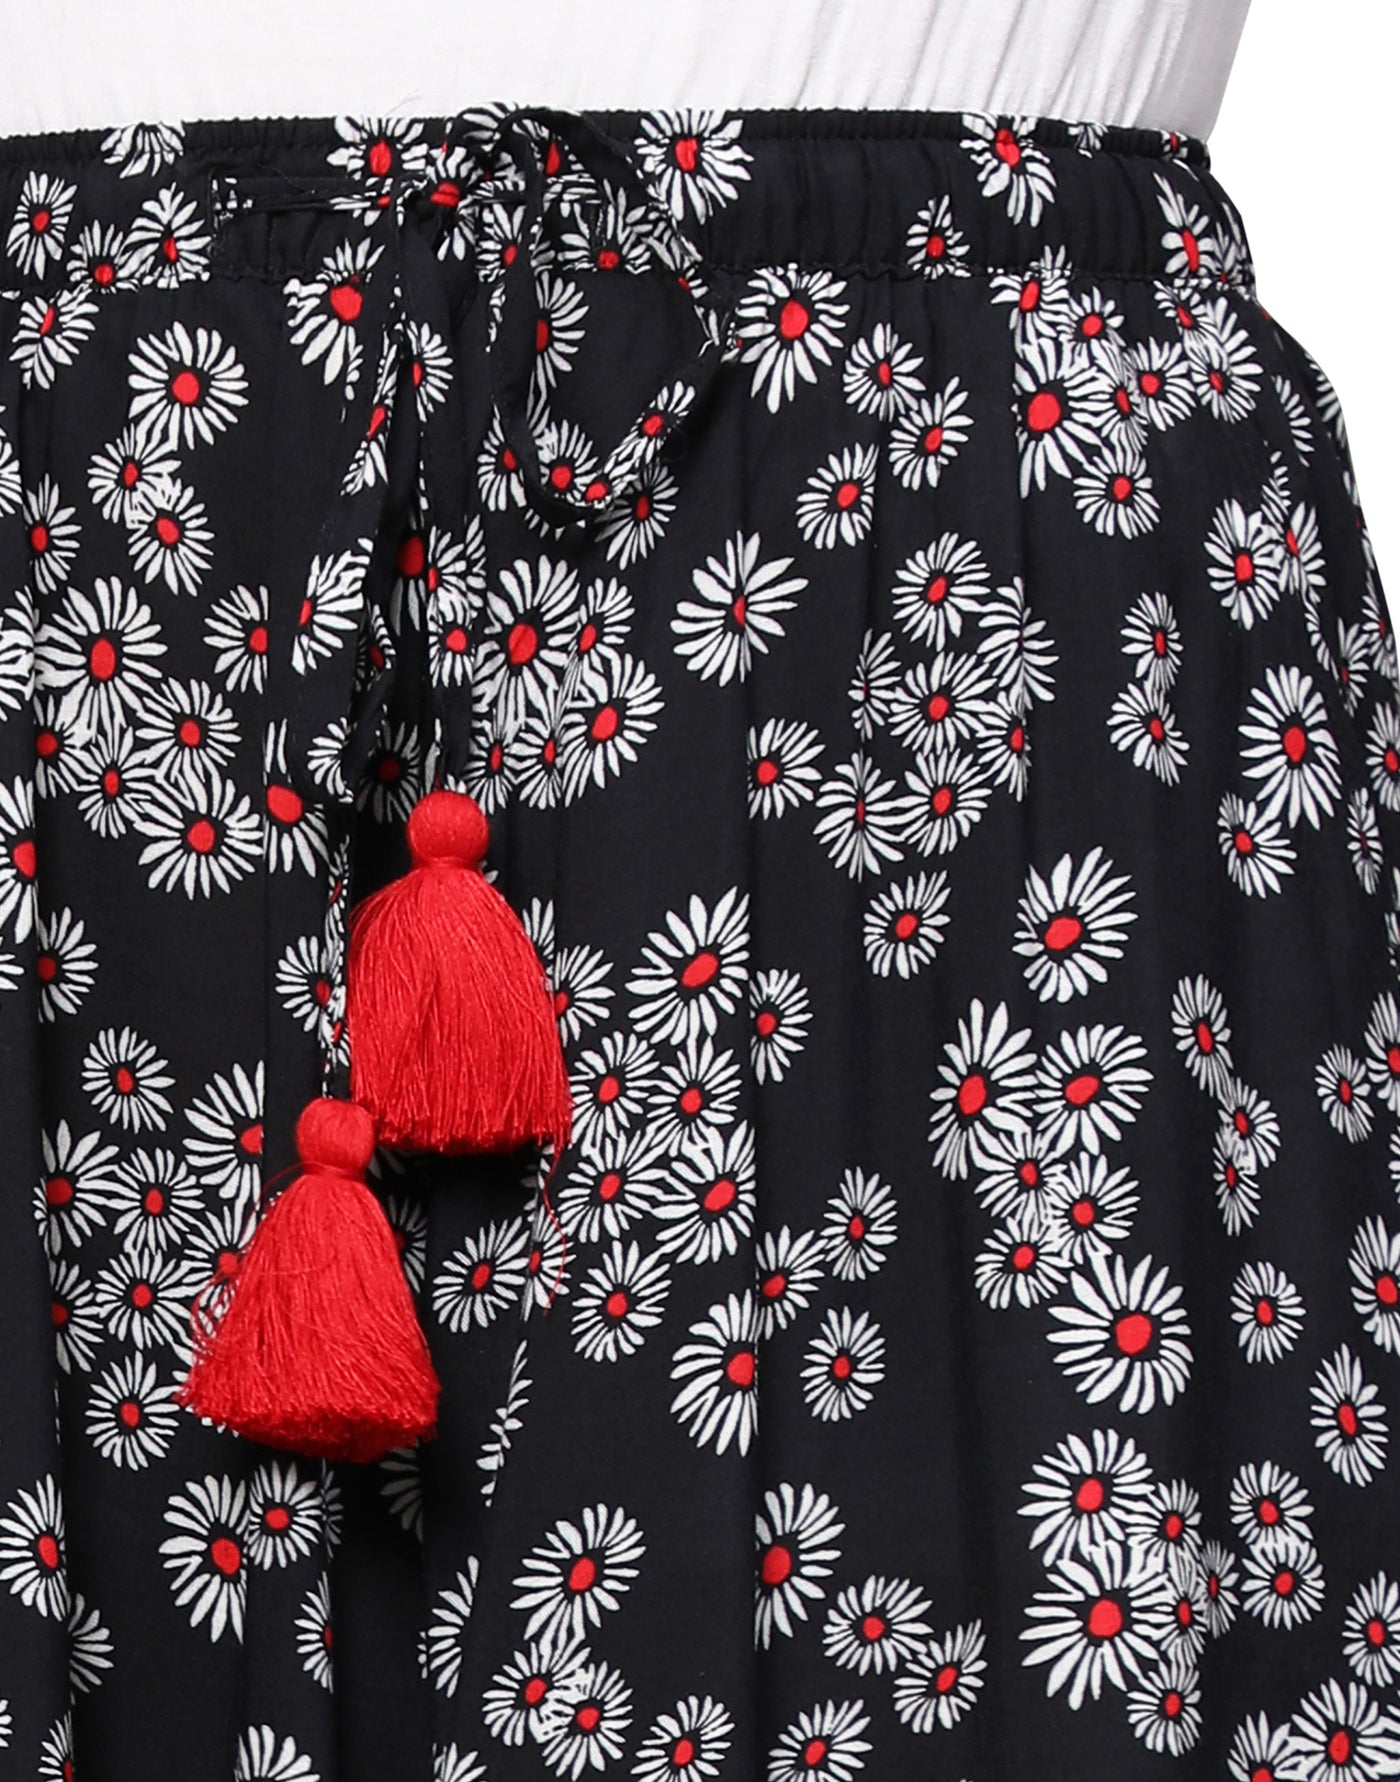 Culottes Shorts for Women-Black Floral